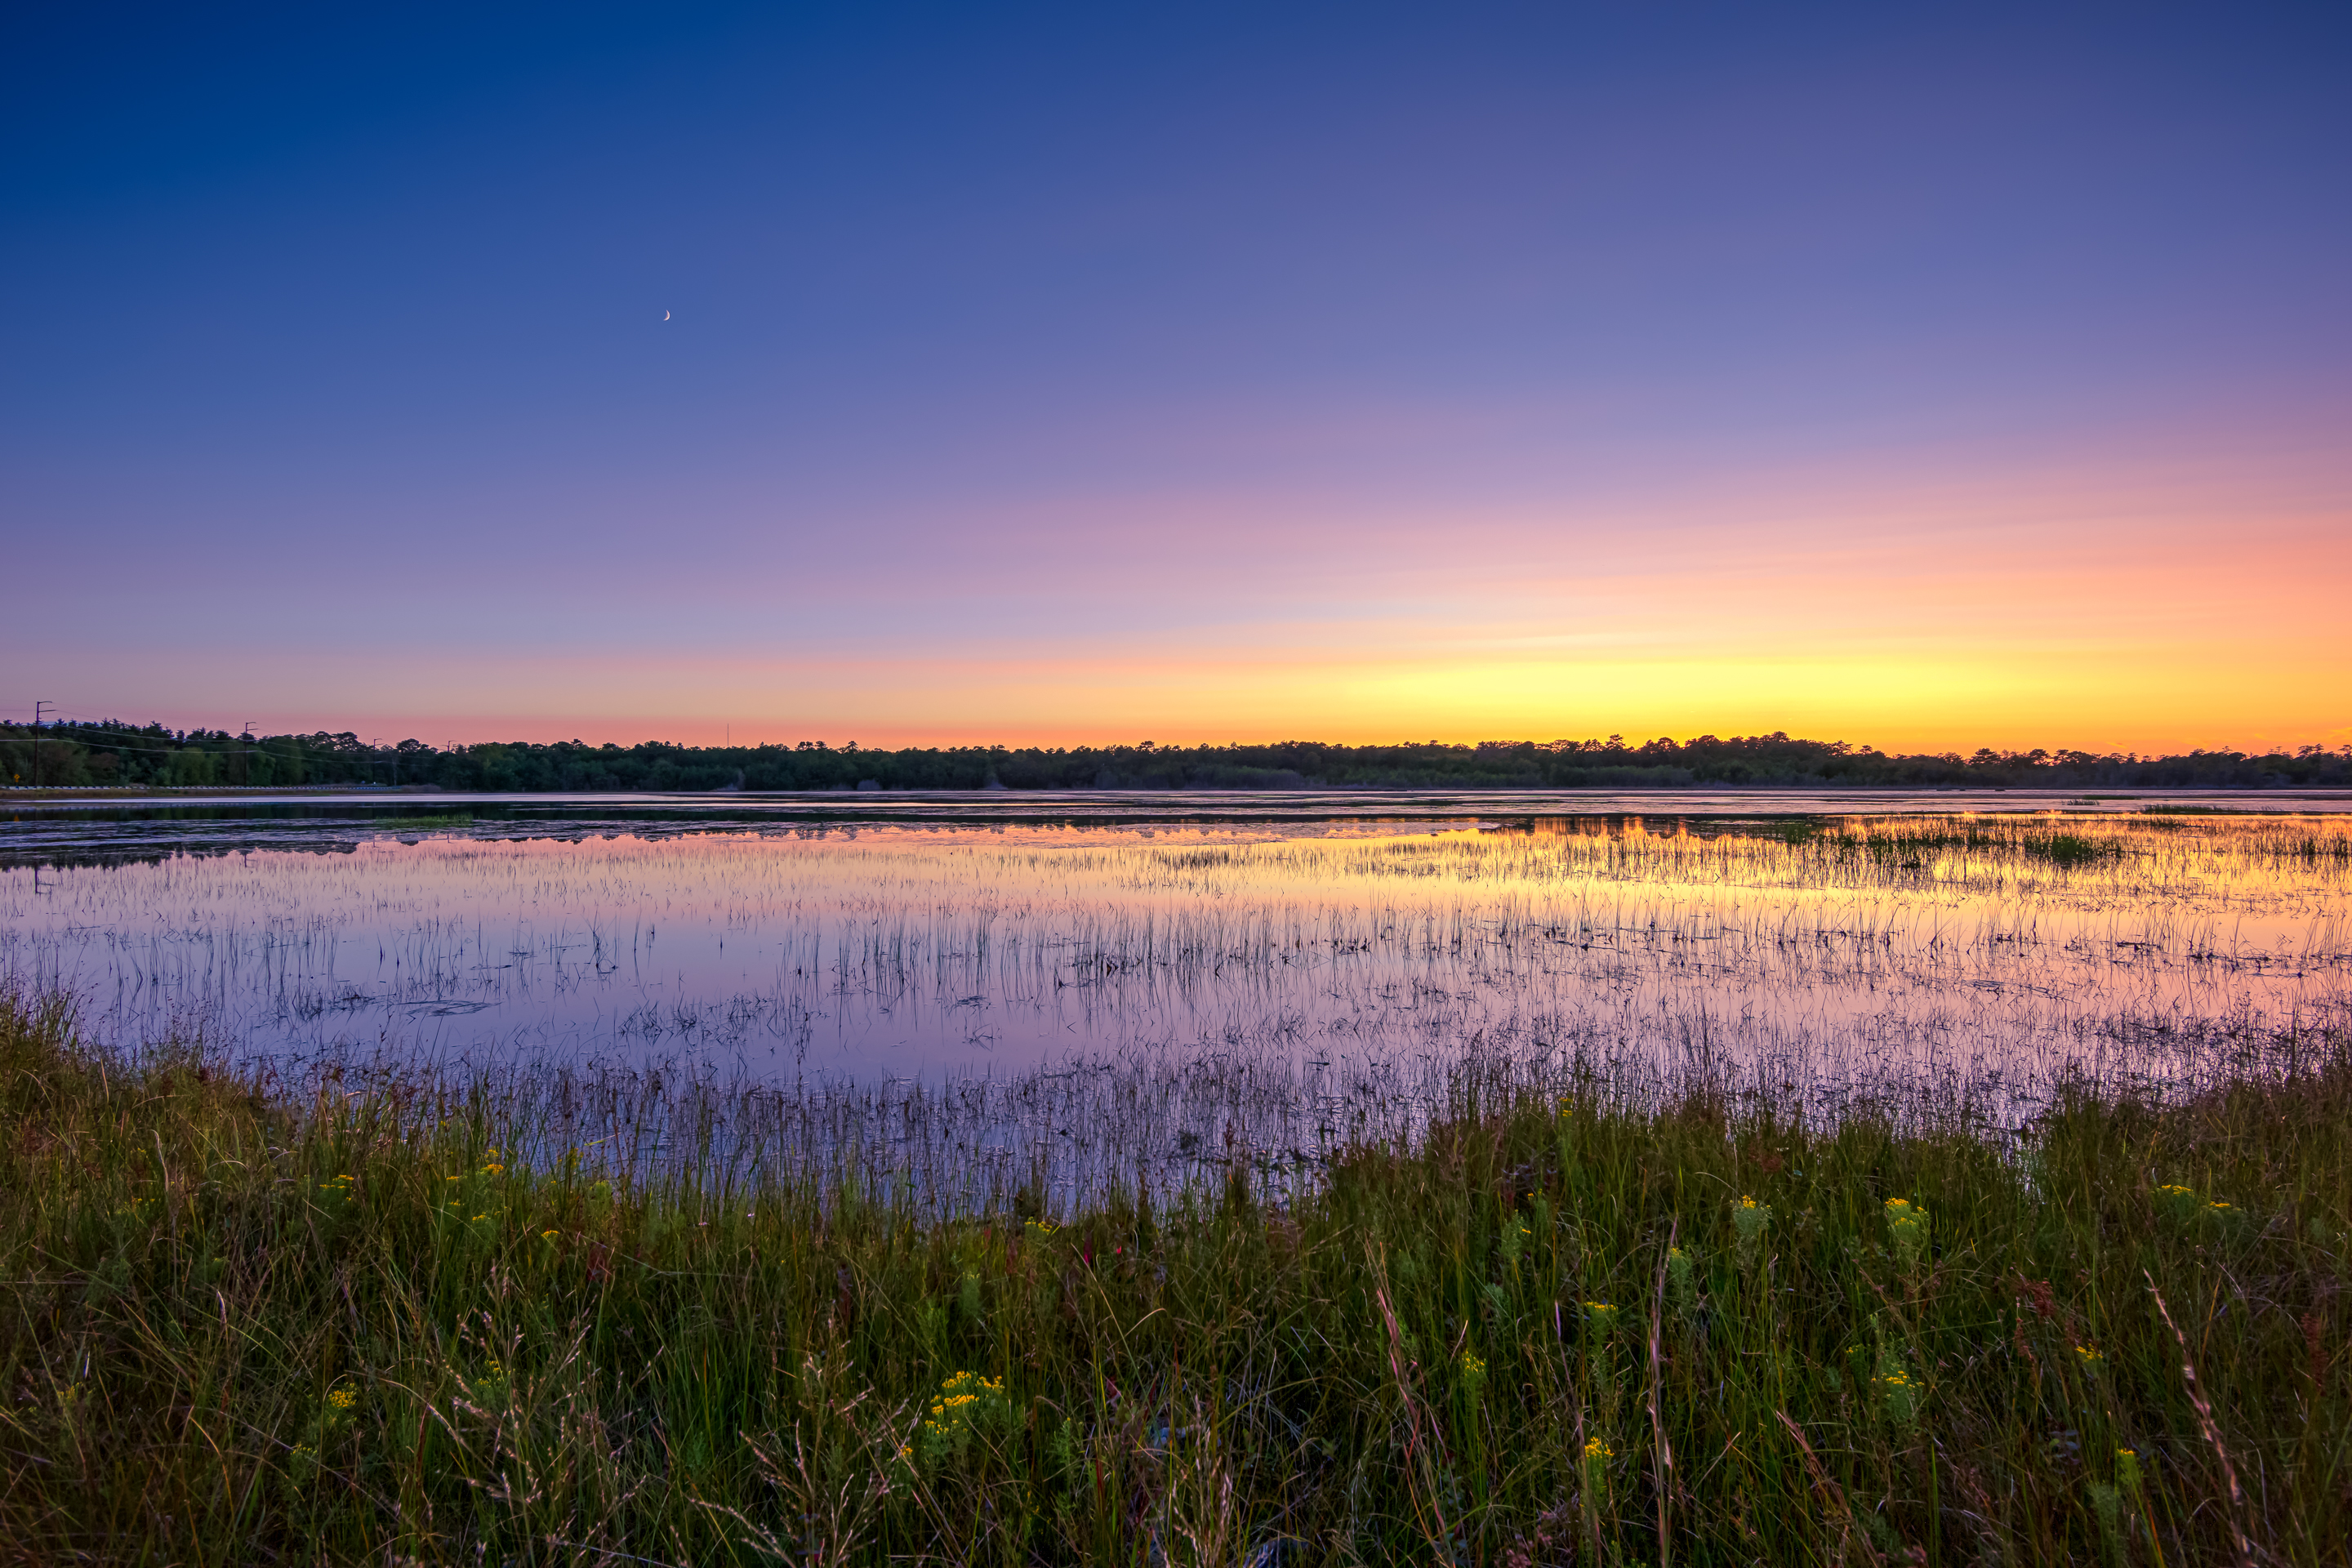 14mm wide angle landscape photo made at blue hour. Clear evening blue skies with a subtle pastel horizon reflect over the still water of Stafford Forge Wildlife Management Area.